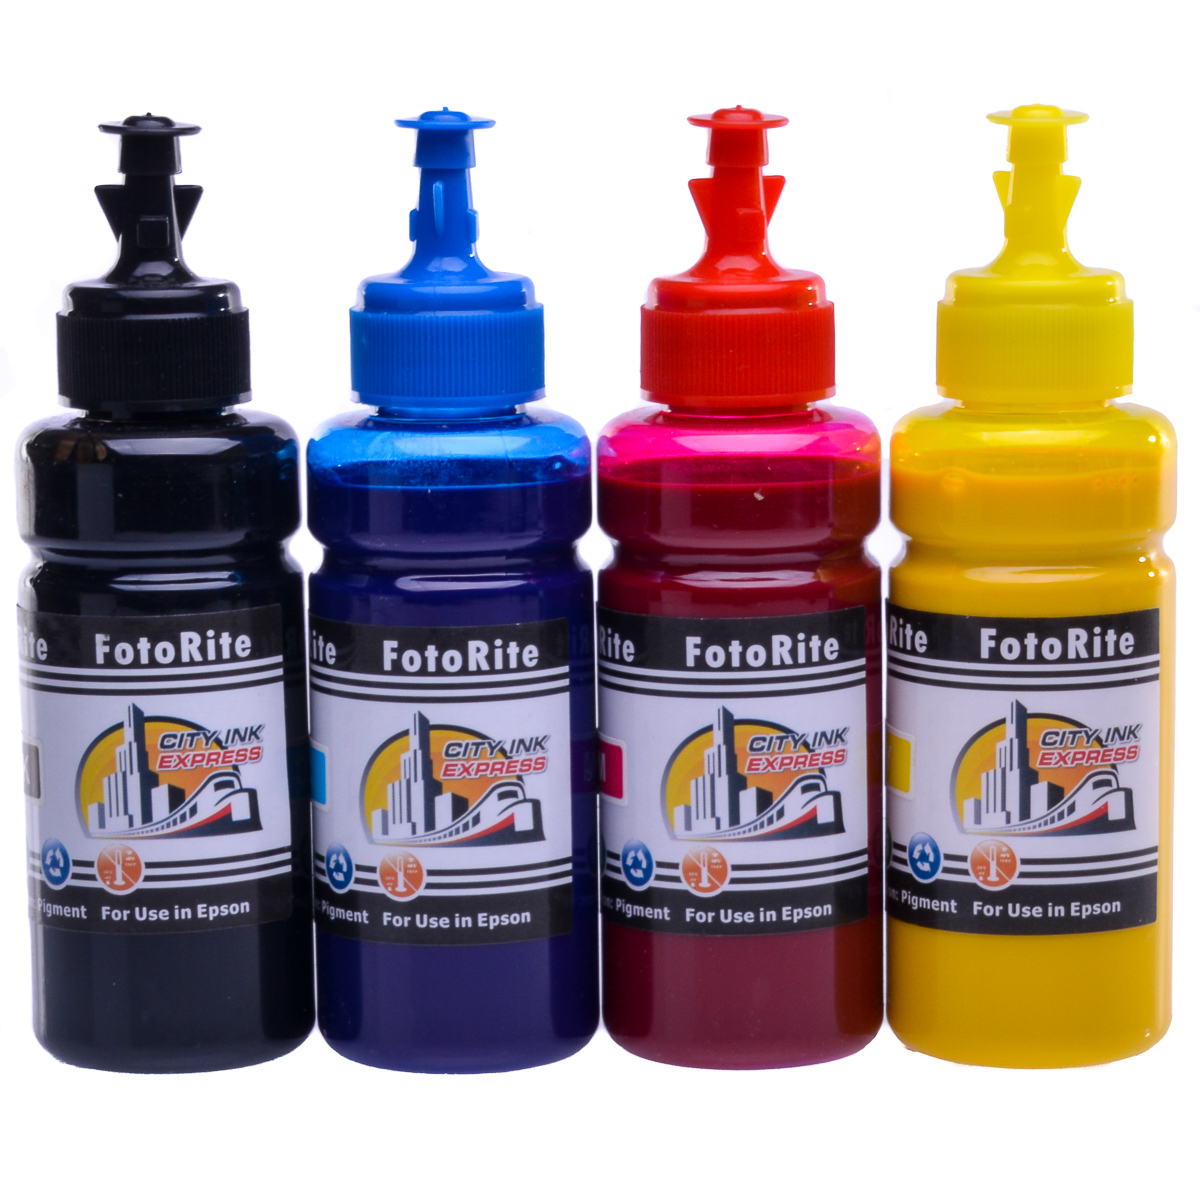 Cheap Multipack pigment ink refill replaces Epson L6490